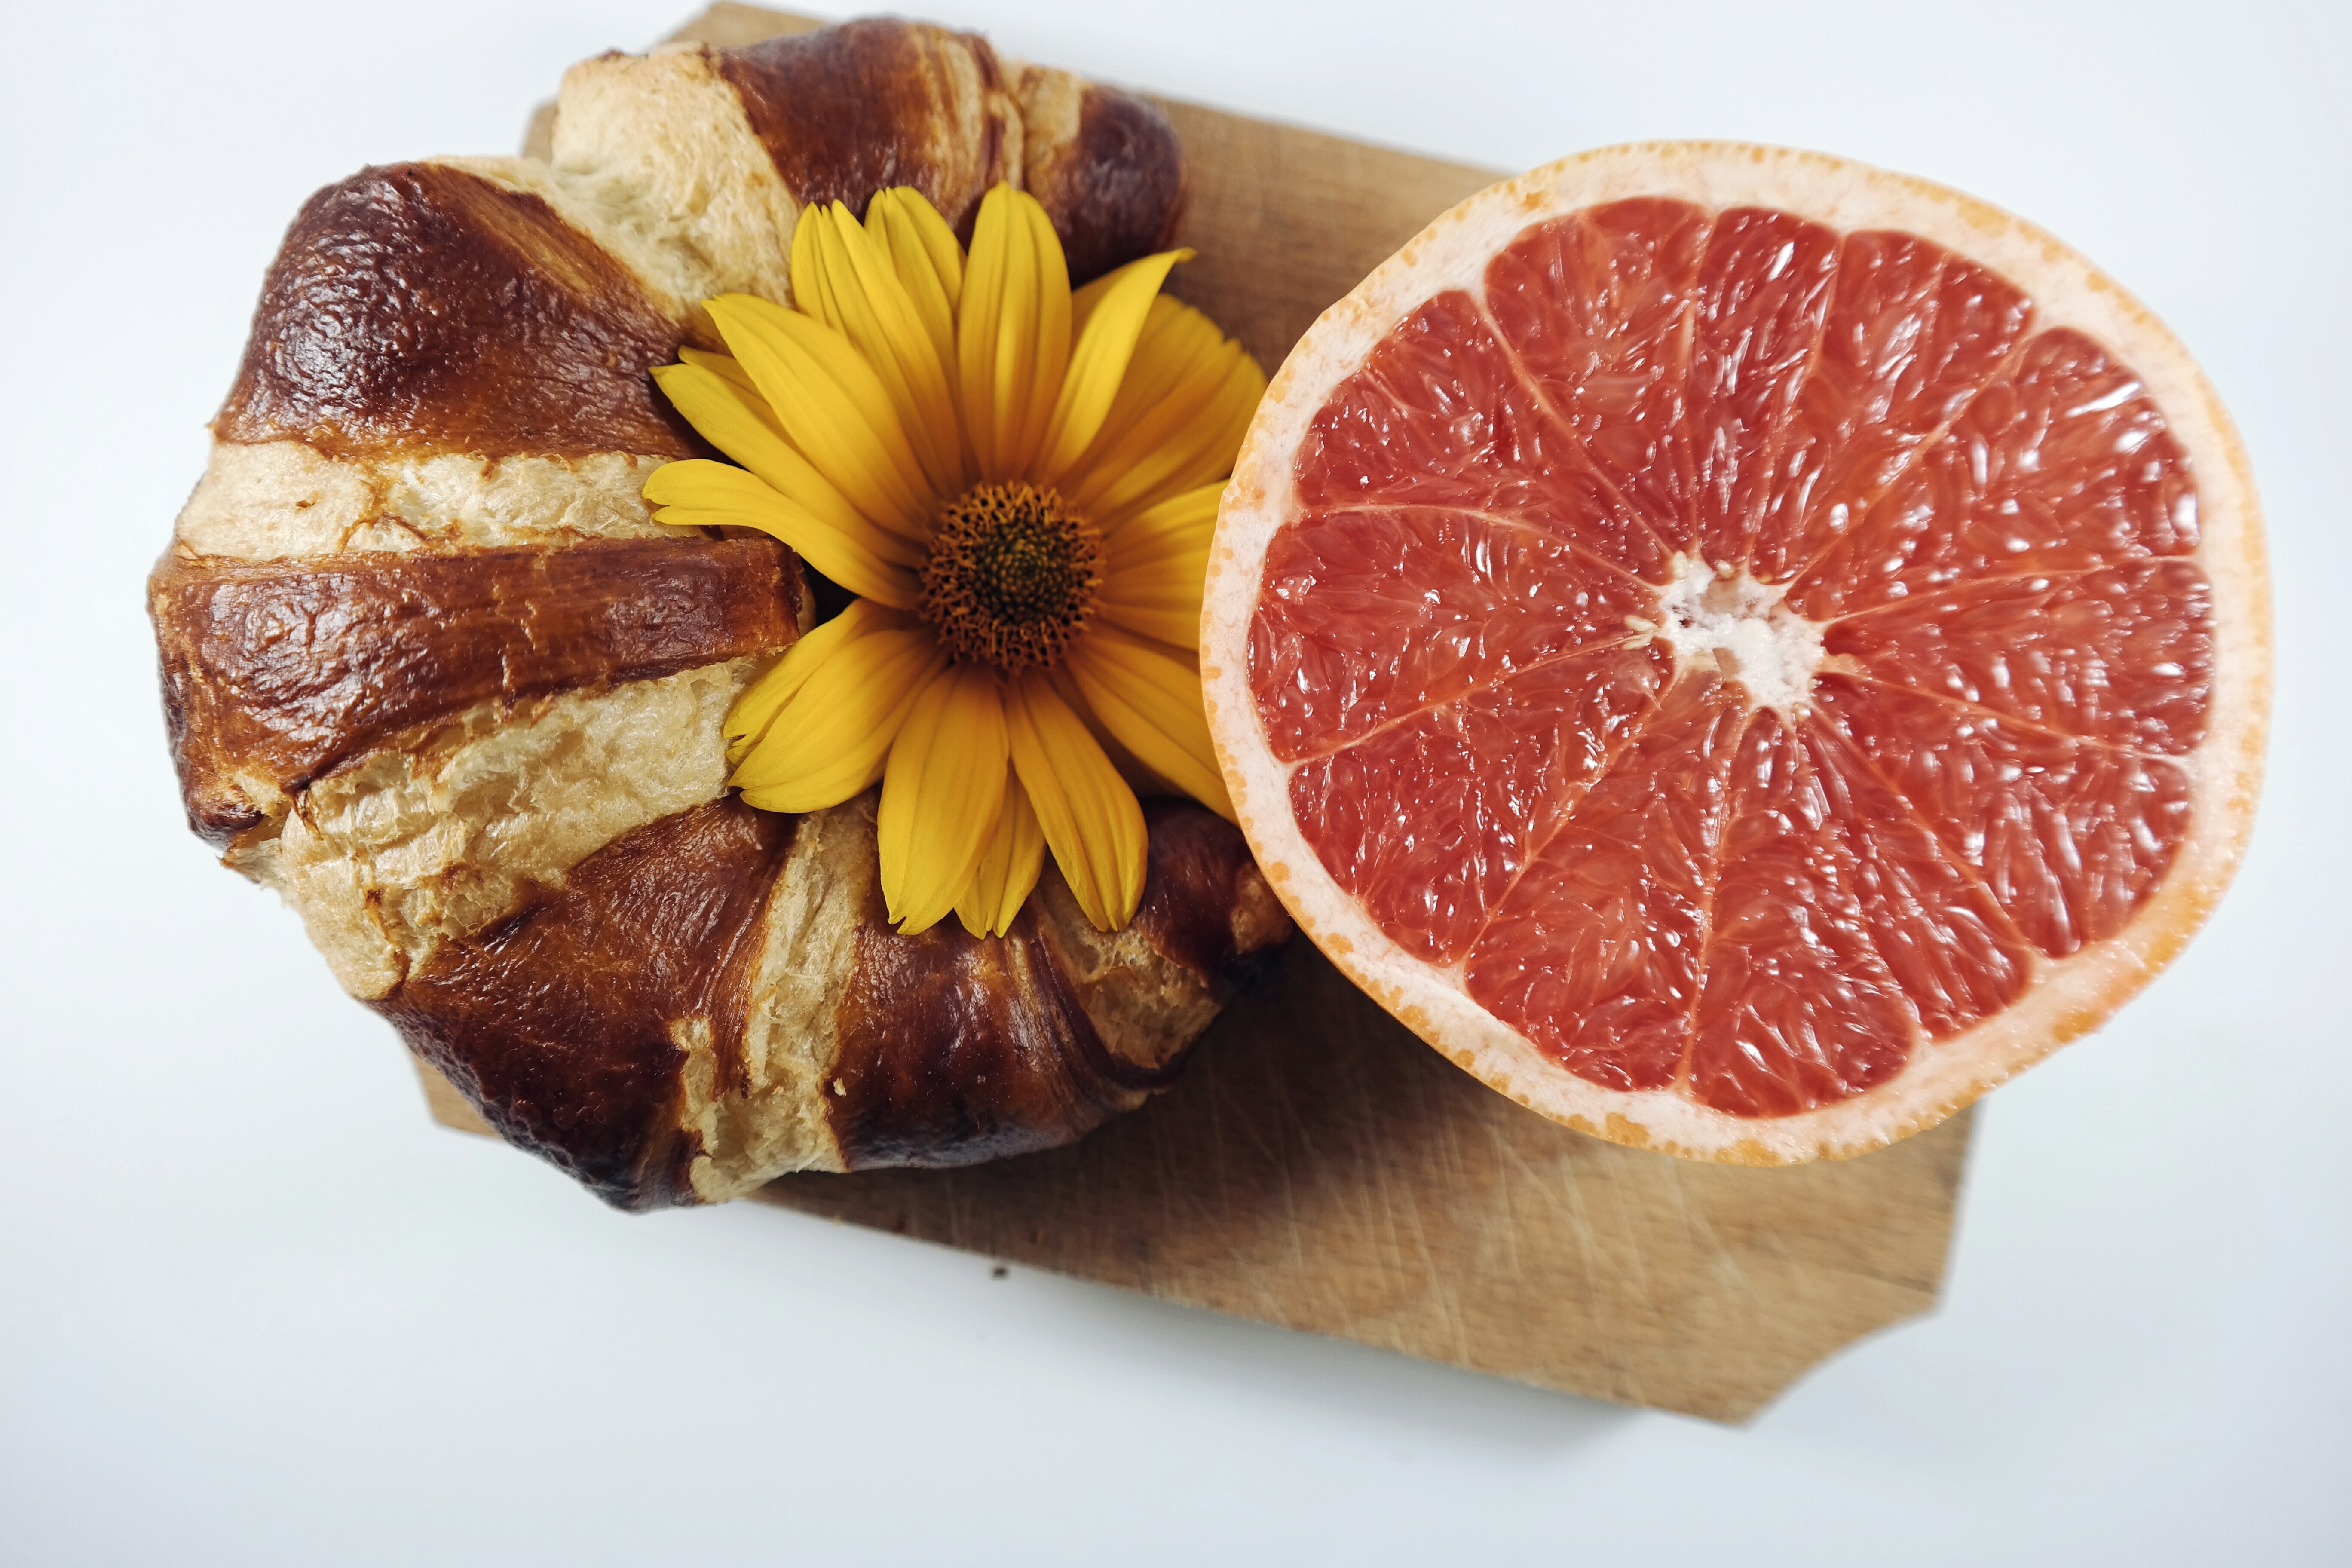 red citrus fruit and brown bread